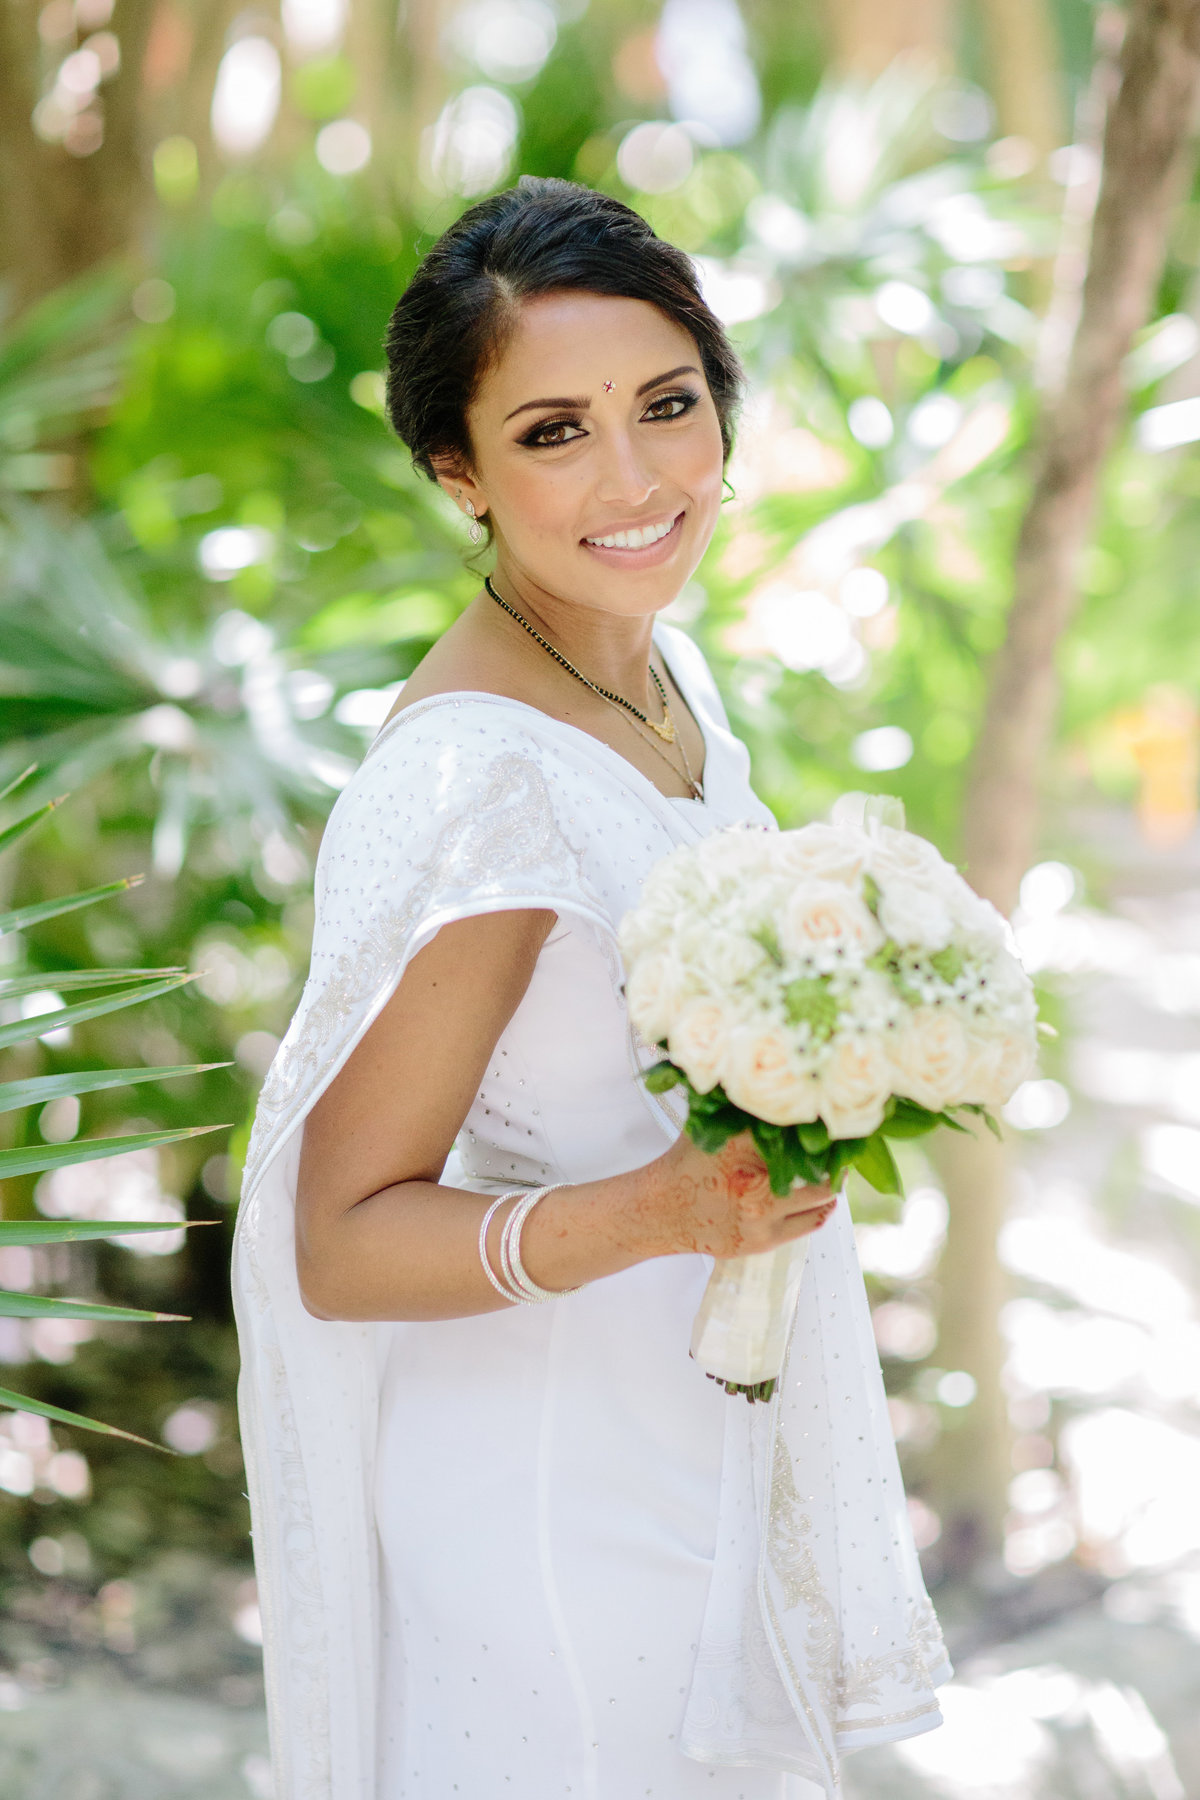 A multi day destination wedding in Mexico with Christian and Hindu influences, all set at the Hard Rock Riviera Maya.